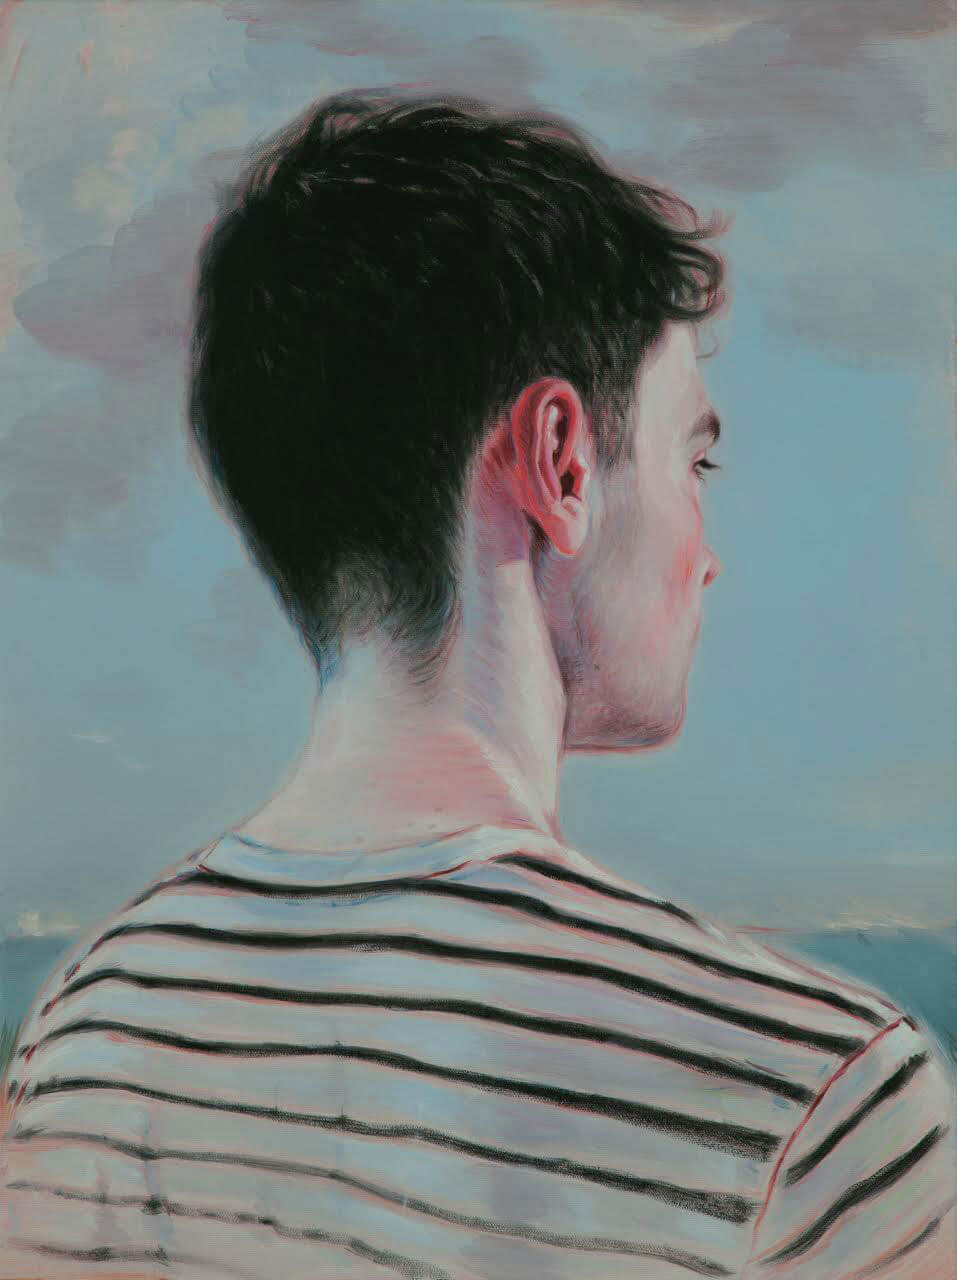 Painting by Kris Knight